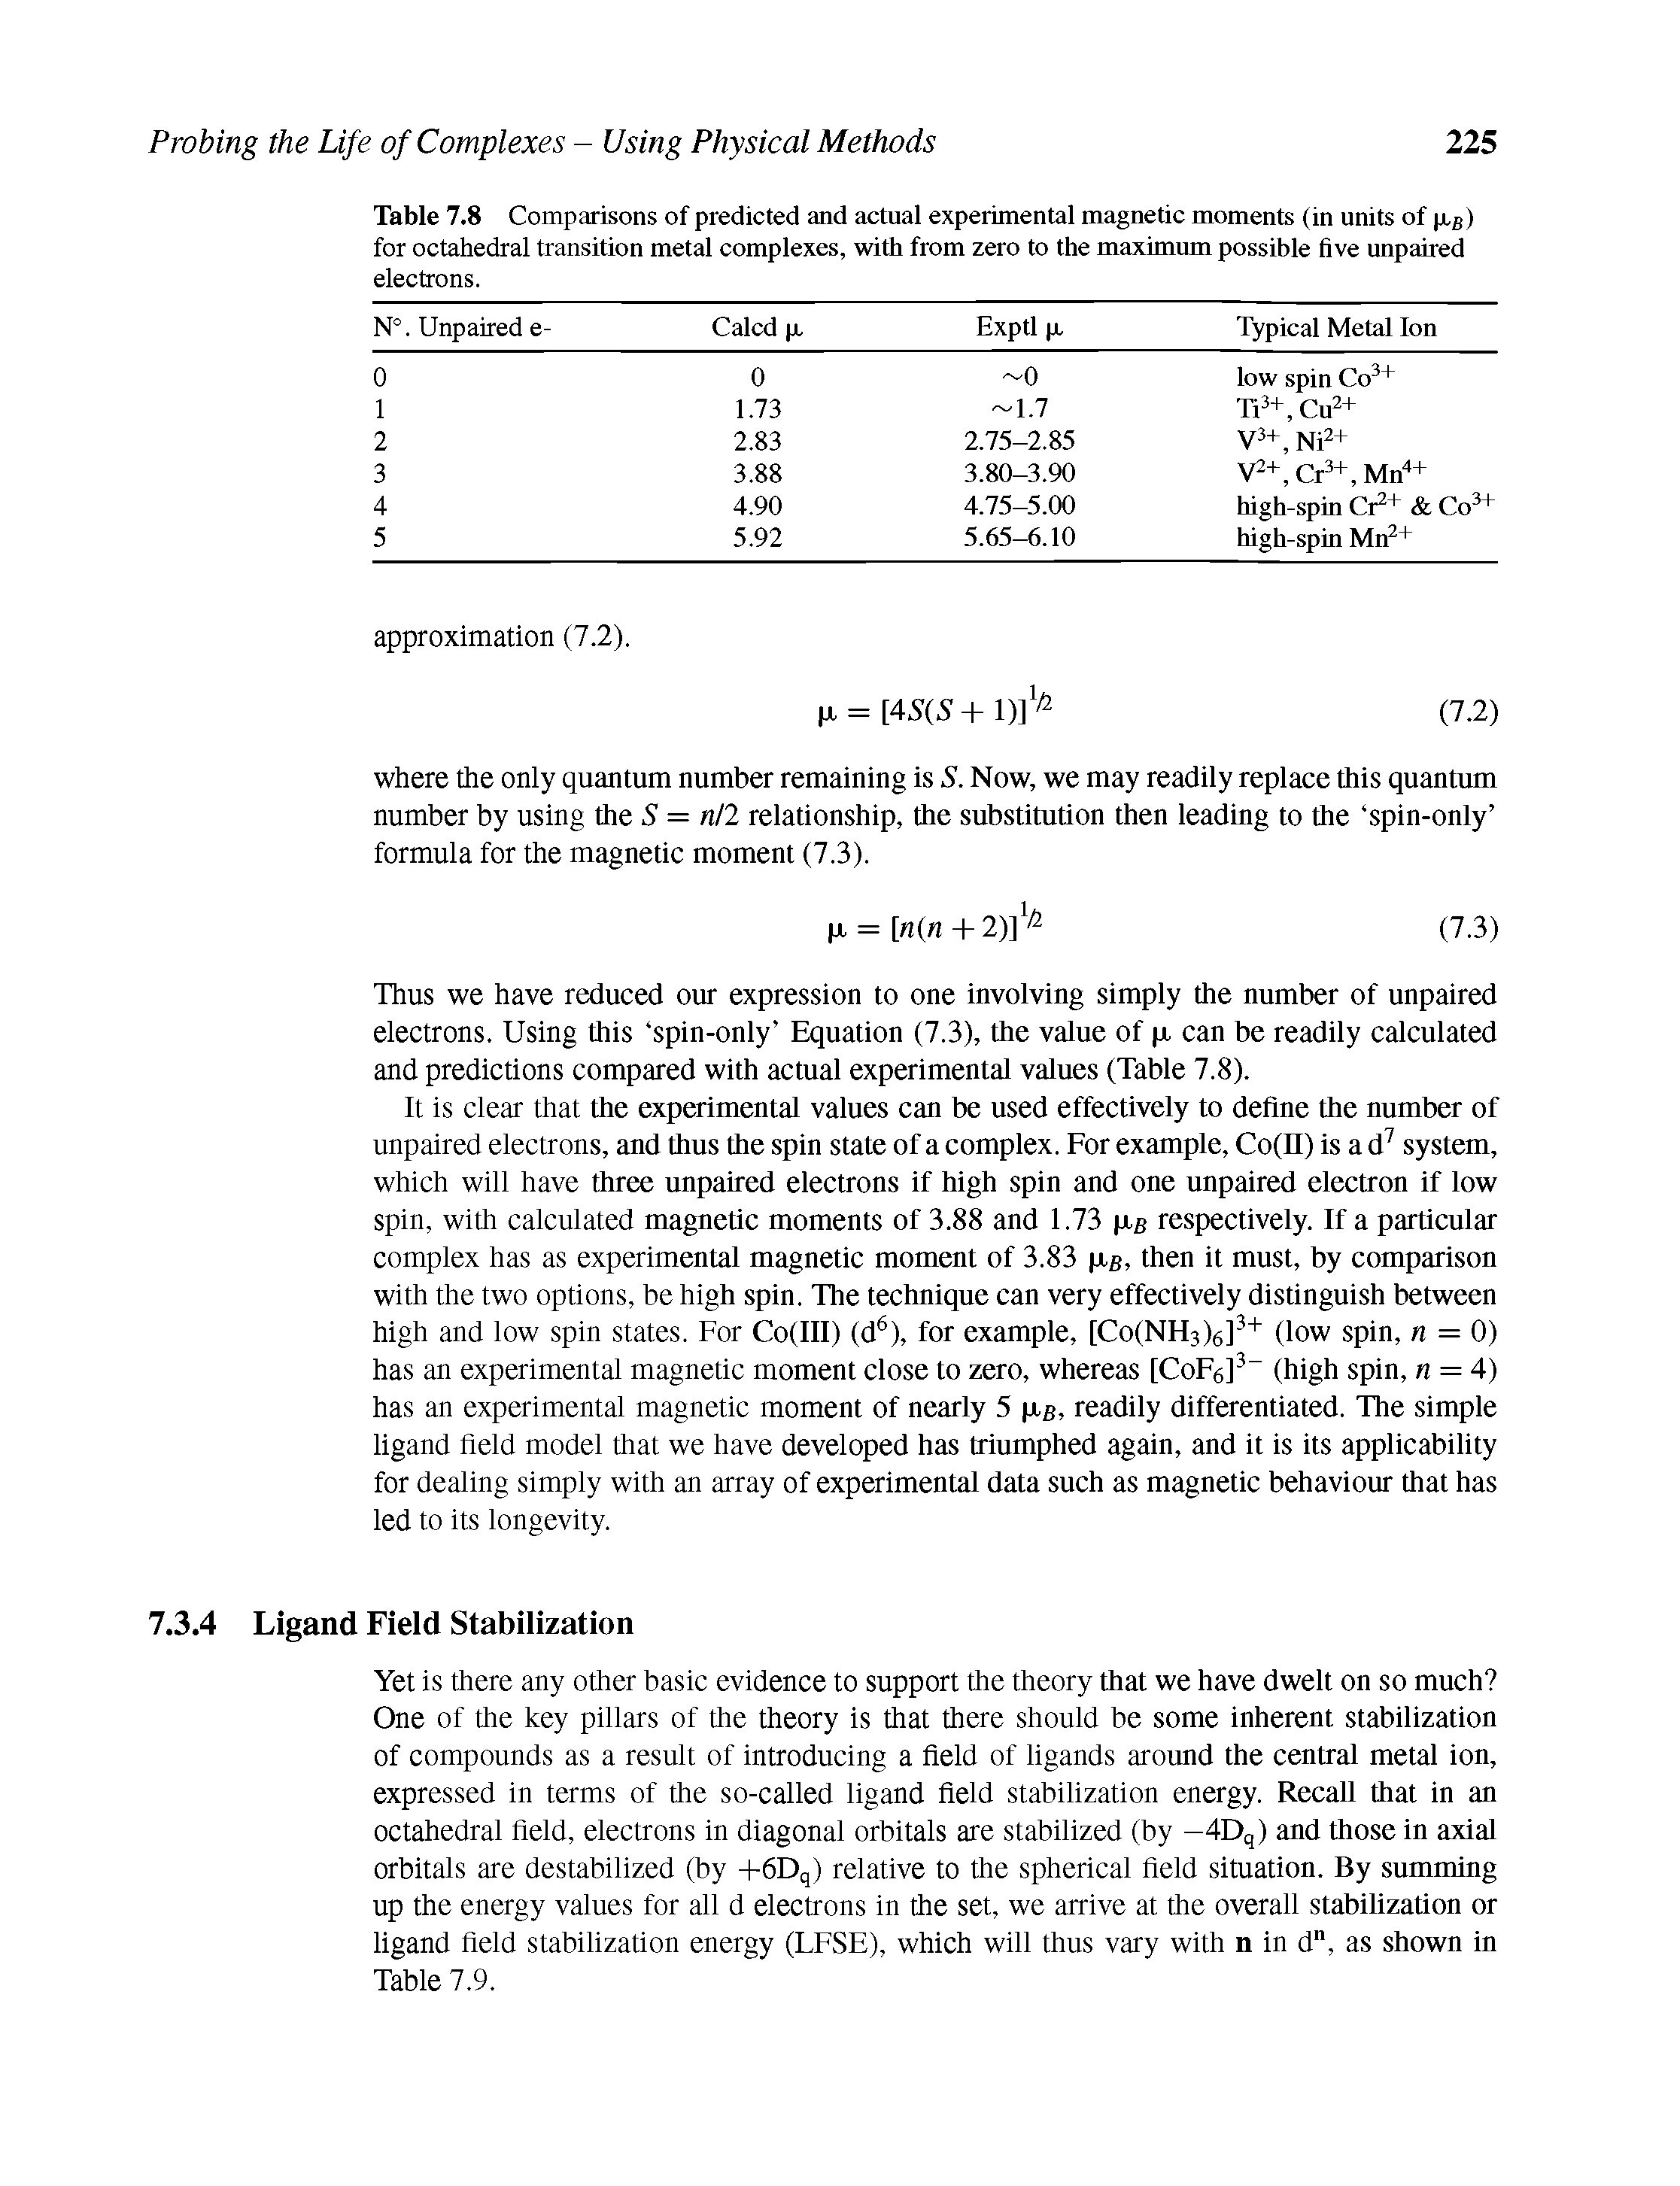 Table 7.8 Comparisons of predicted and actual experimental magnetic moments (in units of xB) for octahedral transition metal complexes, with from zero to the maximum possible five unpaired electrons.